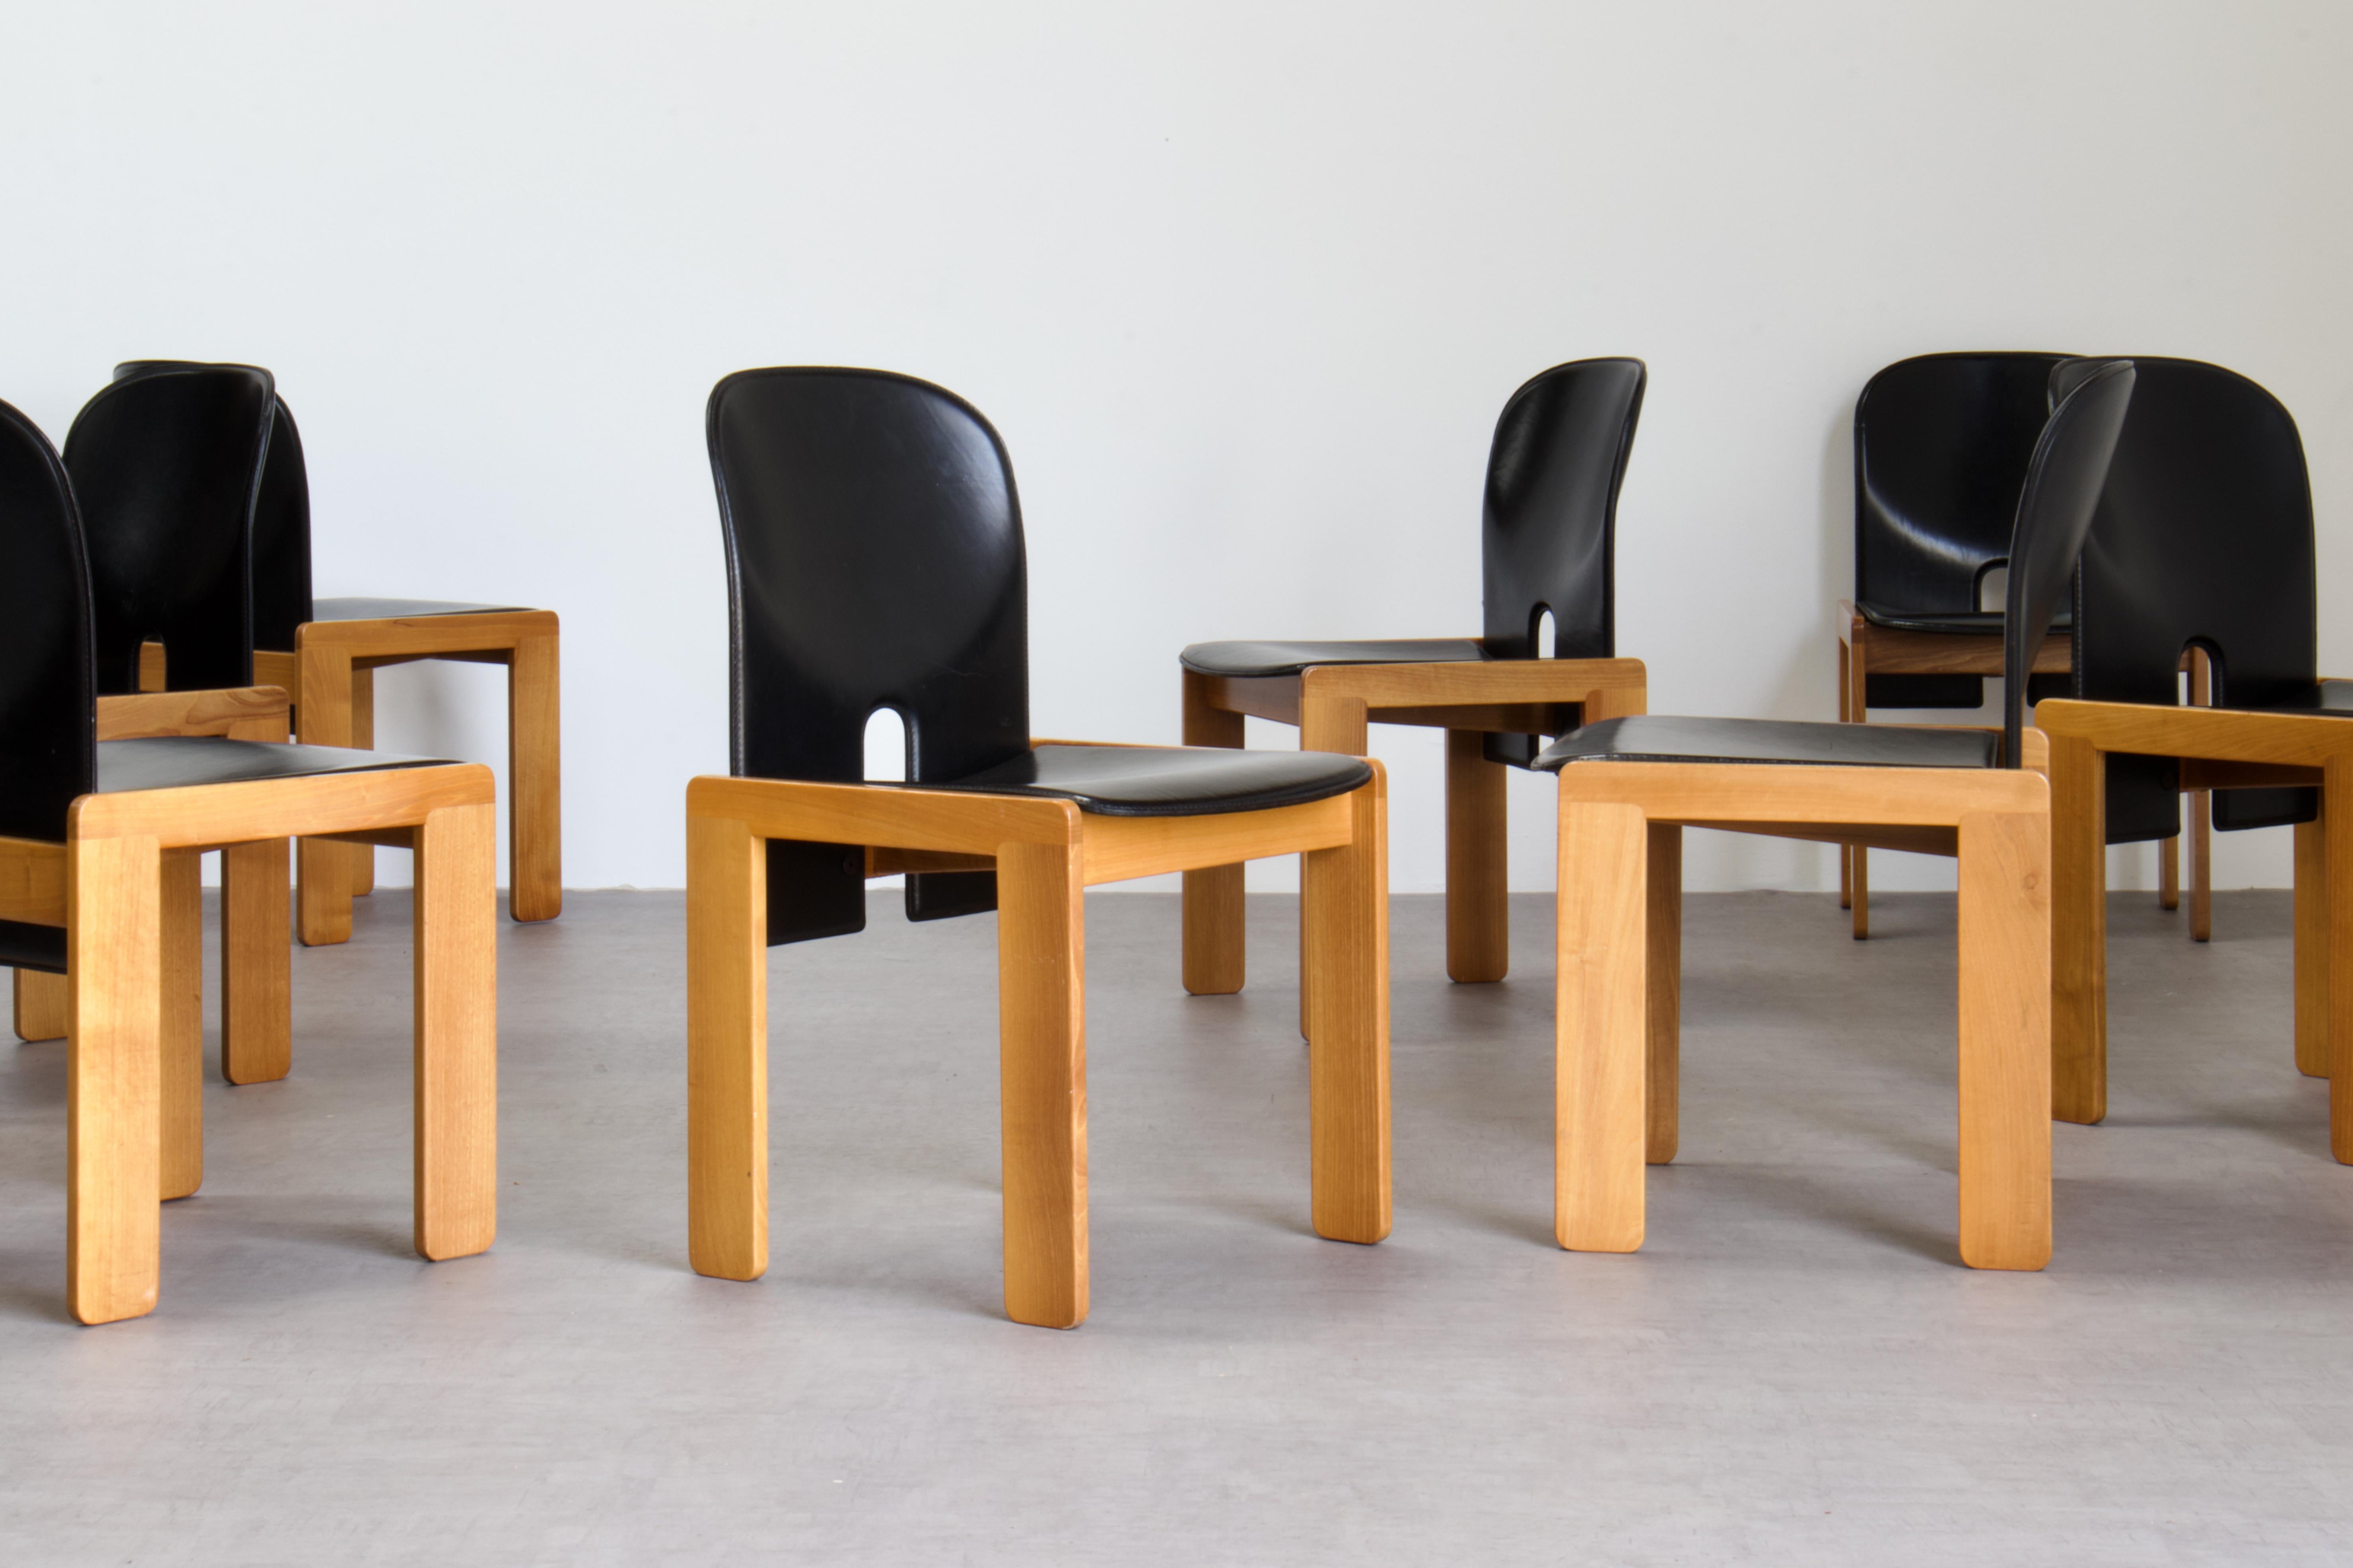 Set of eight Model 121 dining chairs, designed by Afra and Tobia Scarpa and produced by the Italian manufacturer Cassina in 1967. They feature black saddle leather upholstery and a lacquered pale wood structure (ash). 

Remarkable condition for the